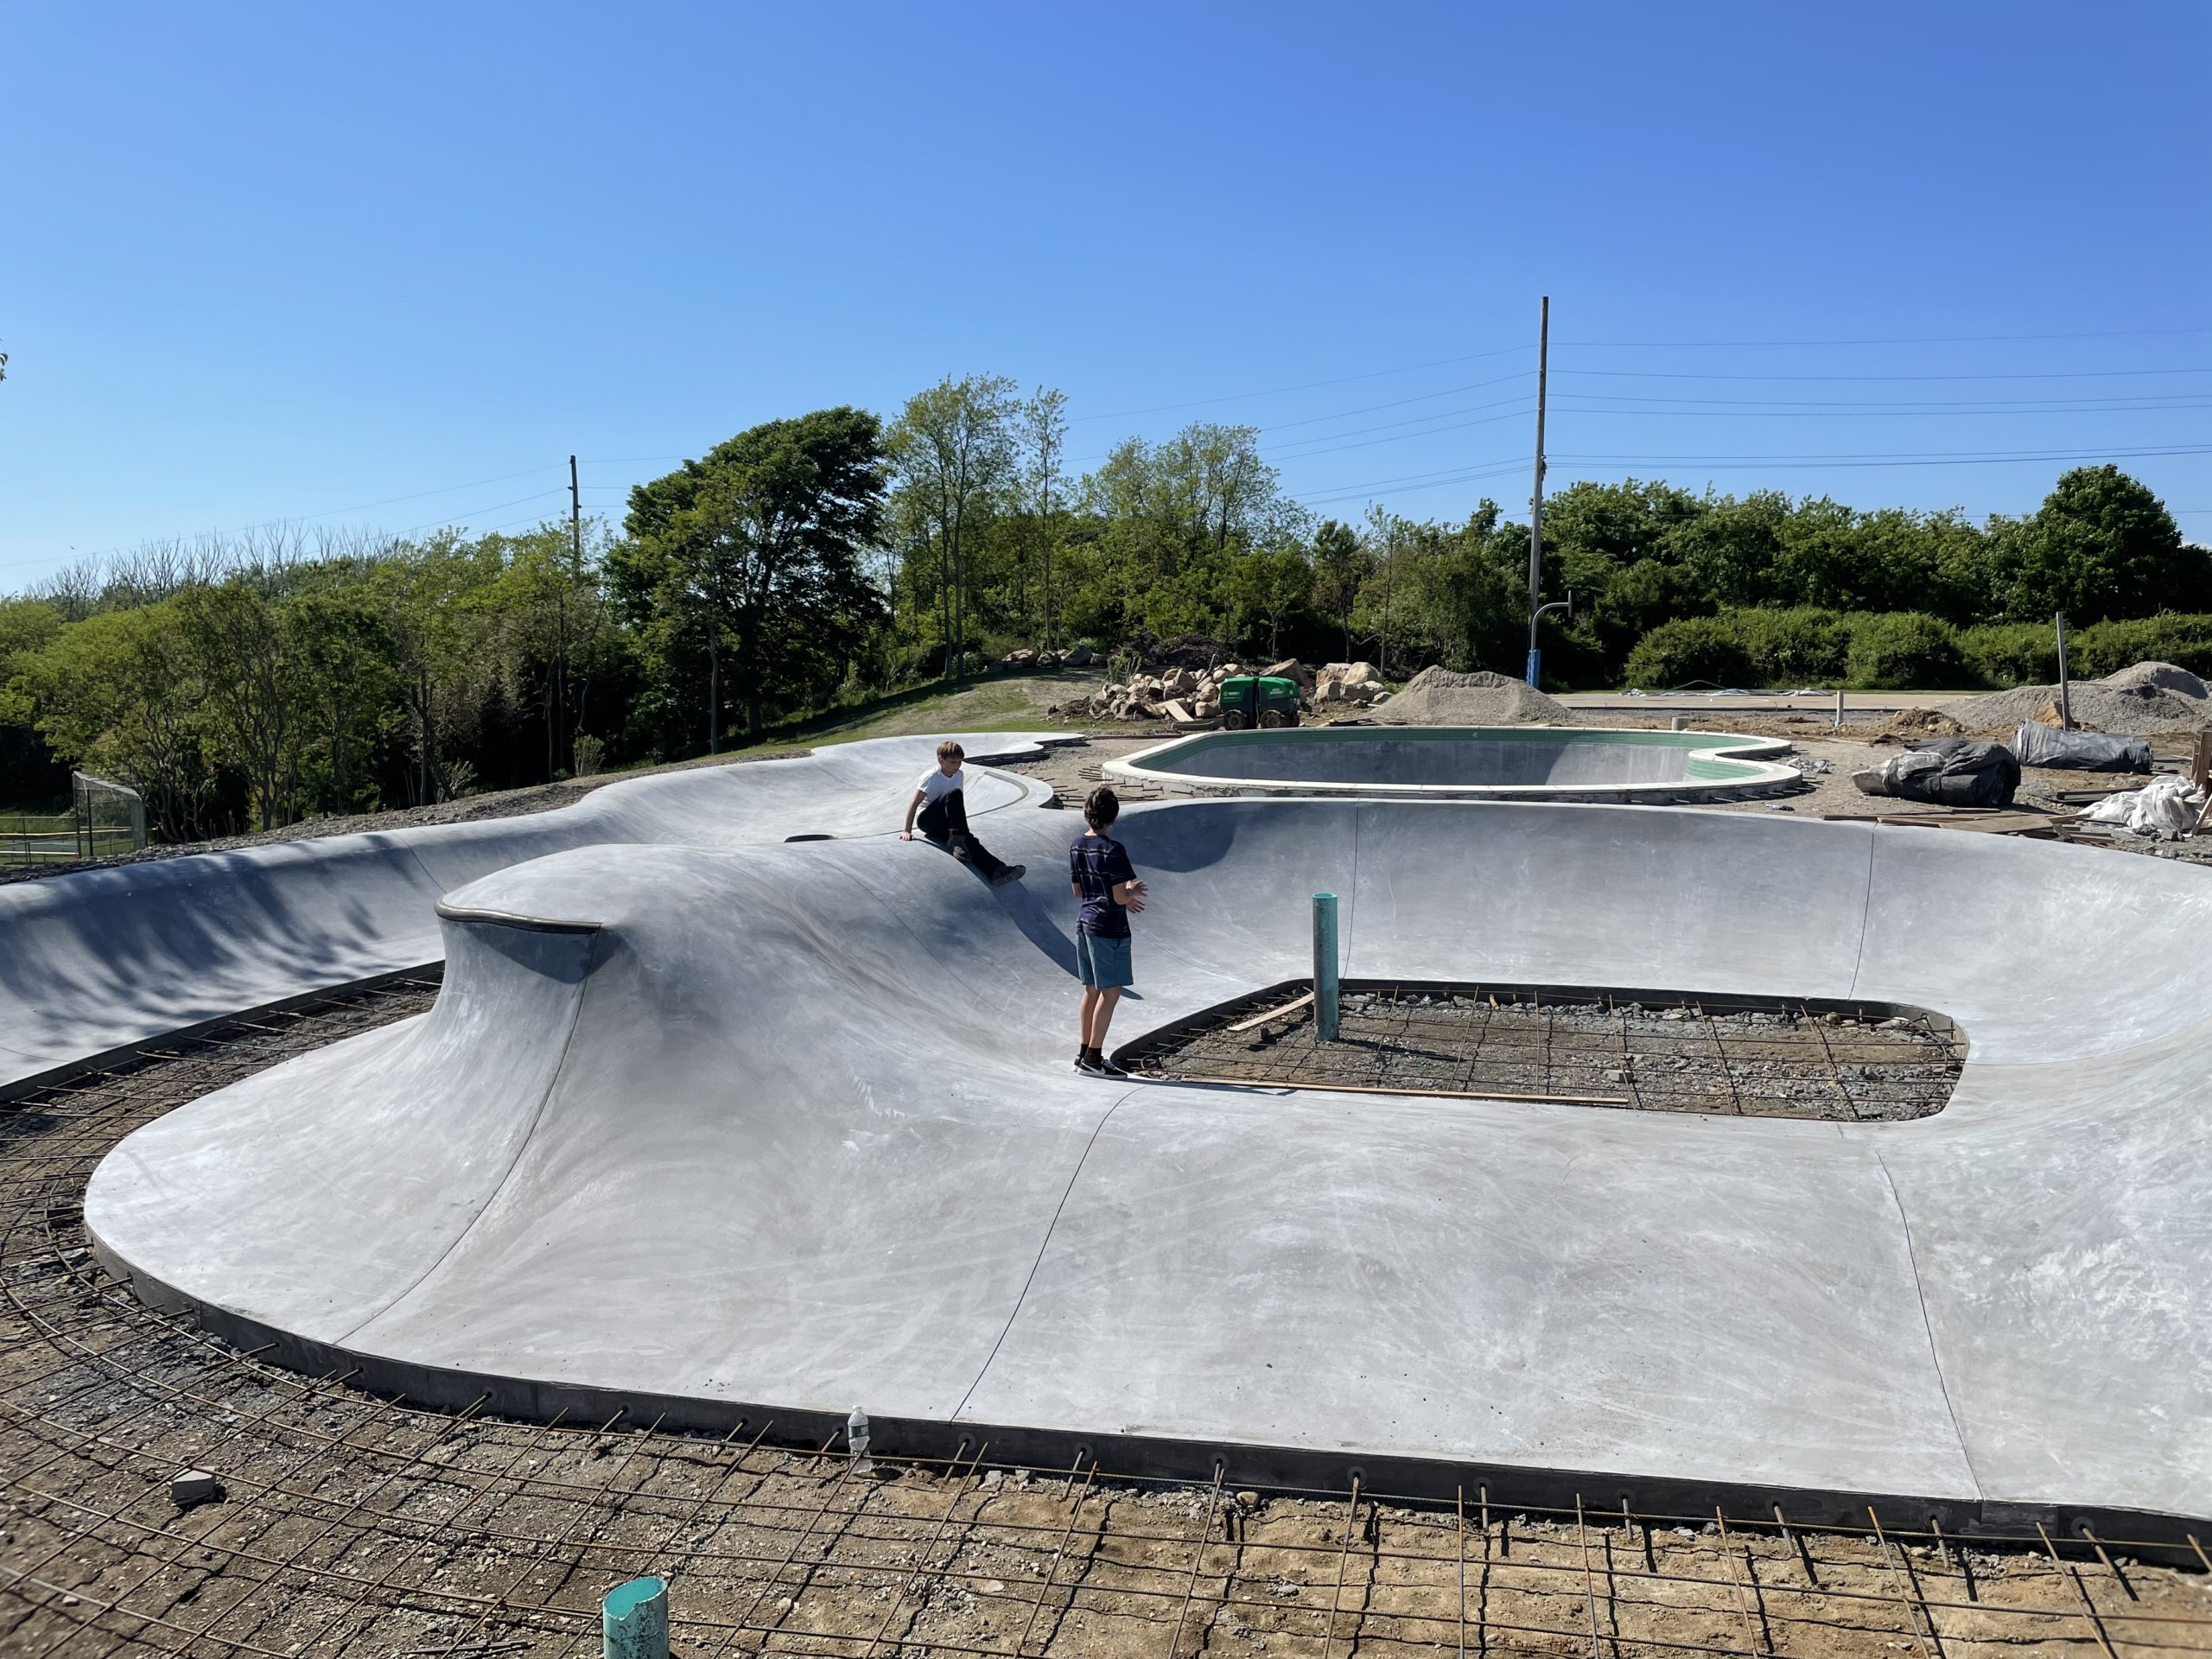 Wave feature in the new Montauk Skatepark